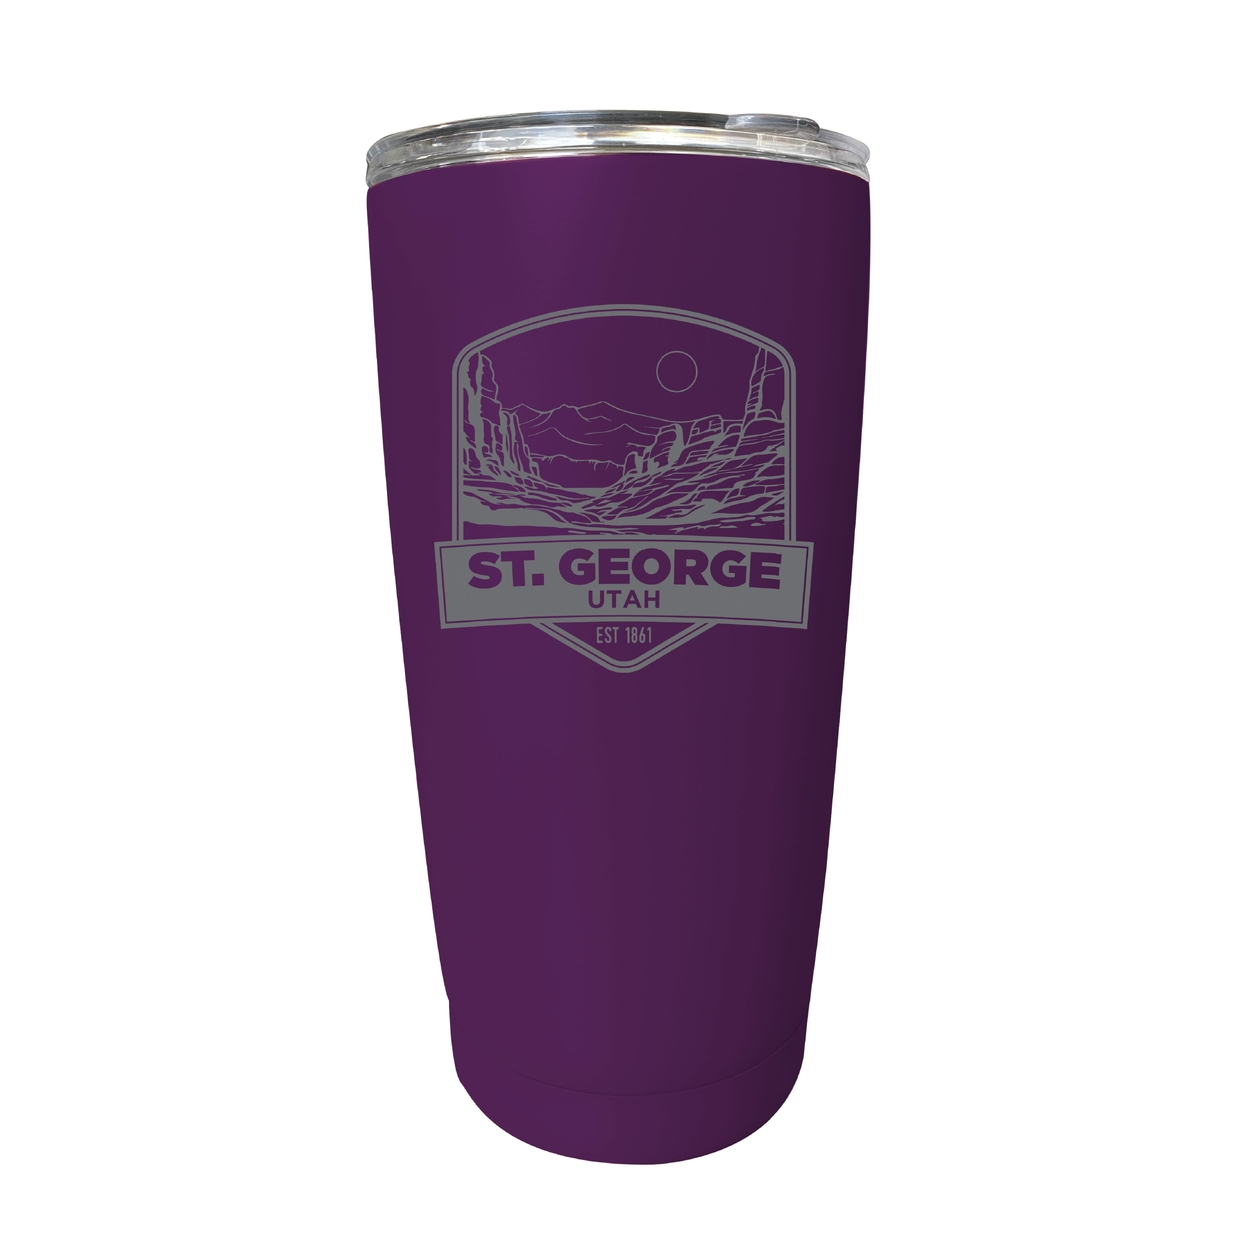 St. George Utah Souvenir 16 Oz Engraved Stainless Steel Insulated Tumbler - Navy,,4-Pack